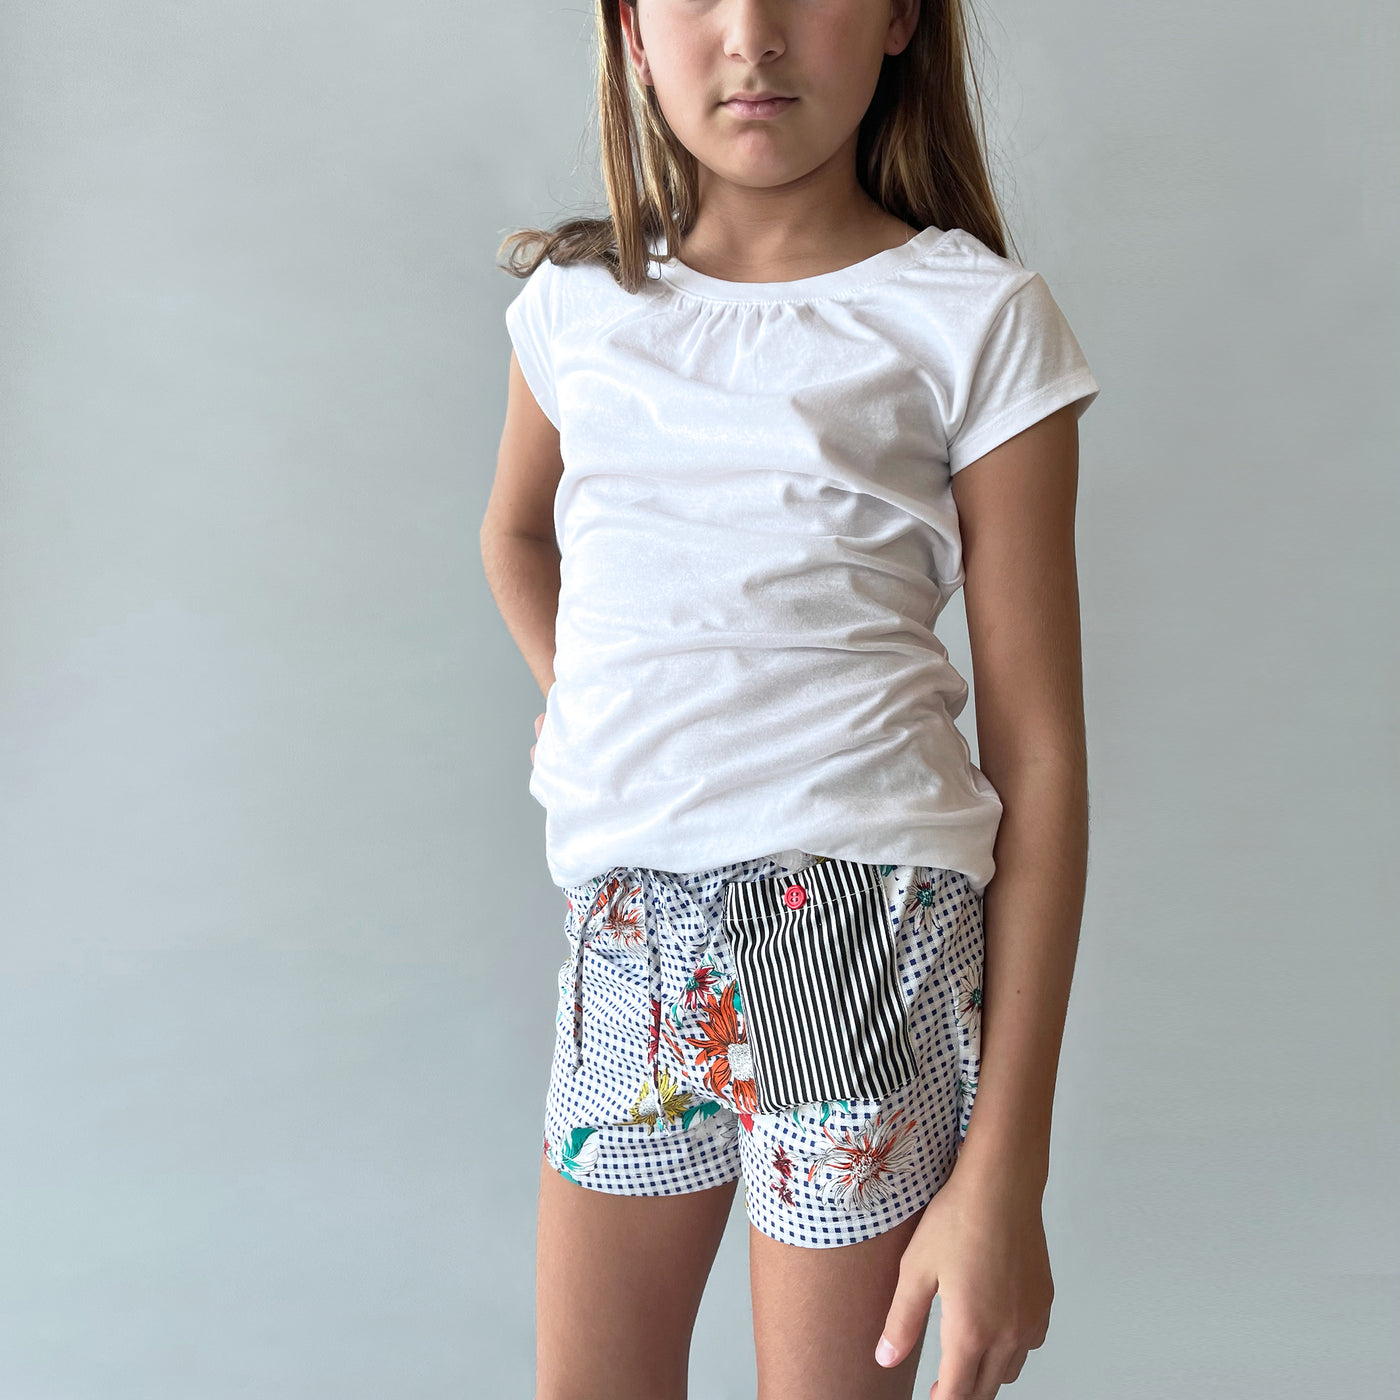 Kids diabetes sleep short with insulin pump holder. Pocket fits both Tandem and Medtronic insulin pumps.